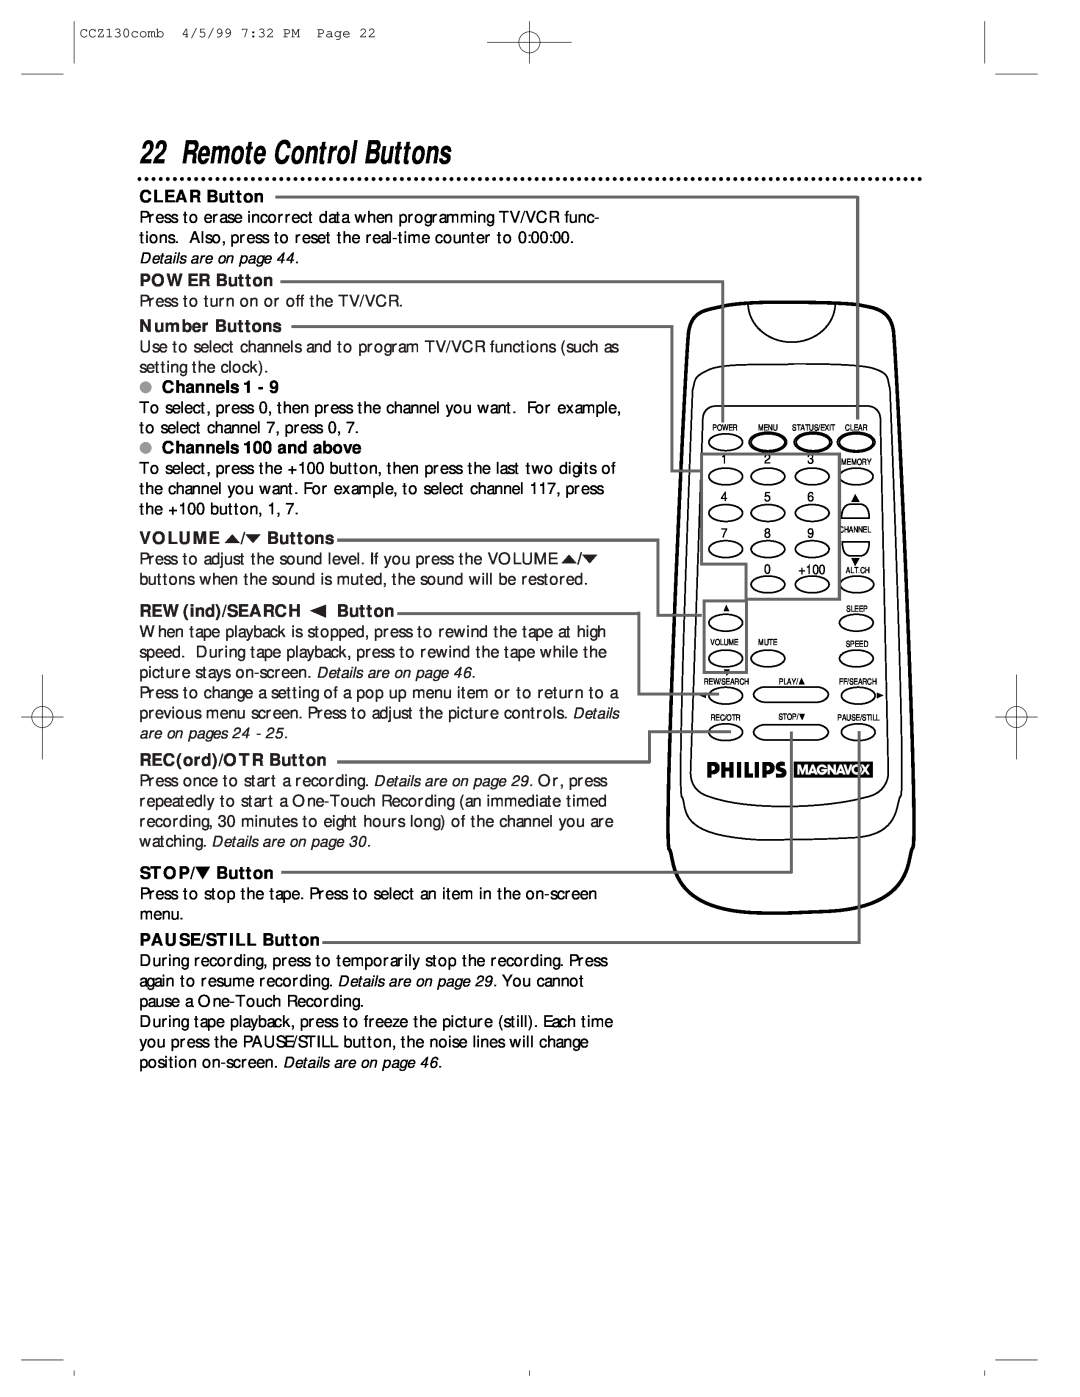 Magnavox CCZ130AT owner manual Remote Control Buttons, are on pages 24, watching. Details are on page 